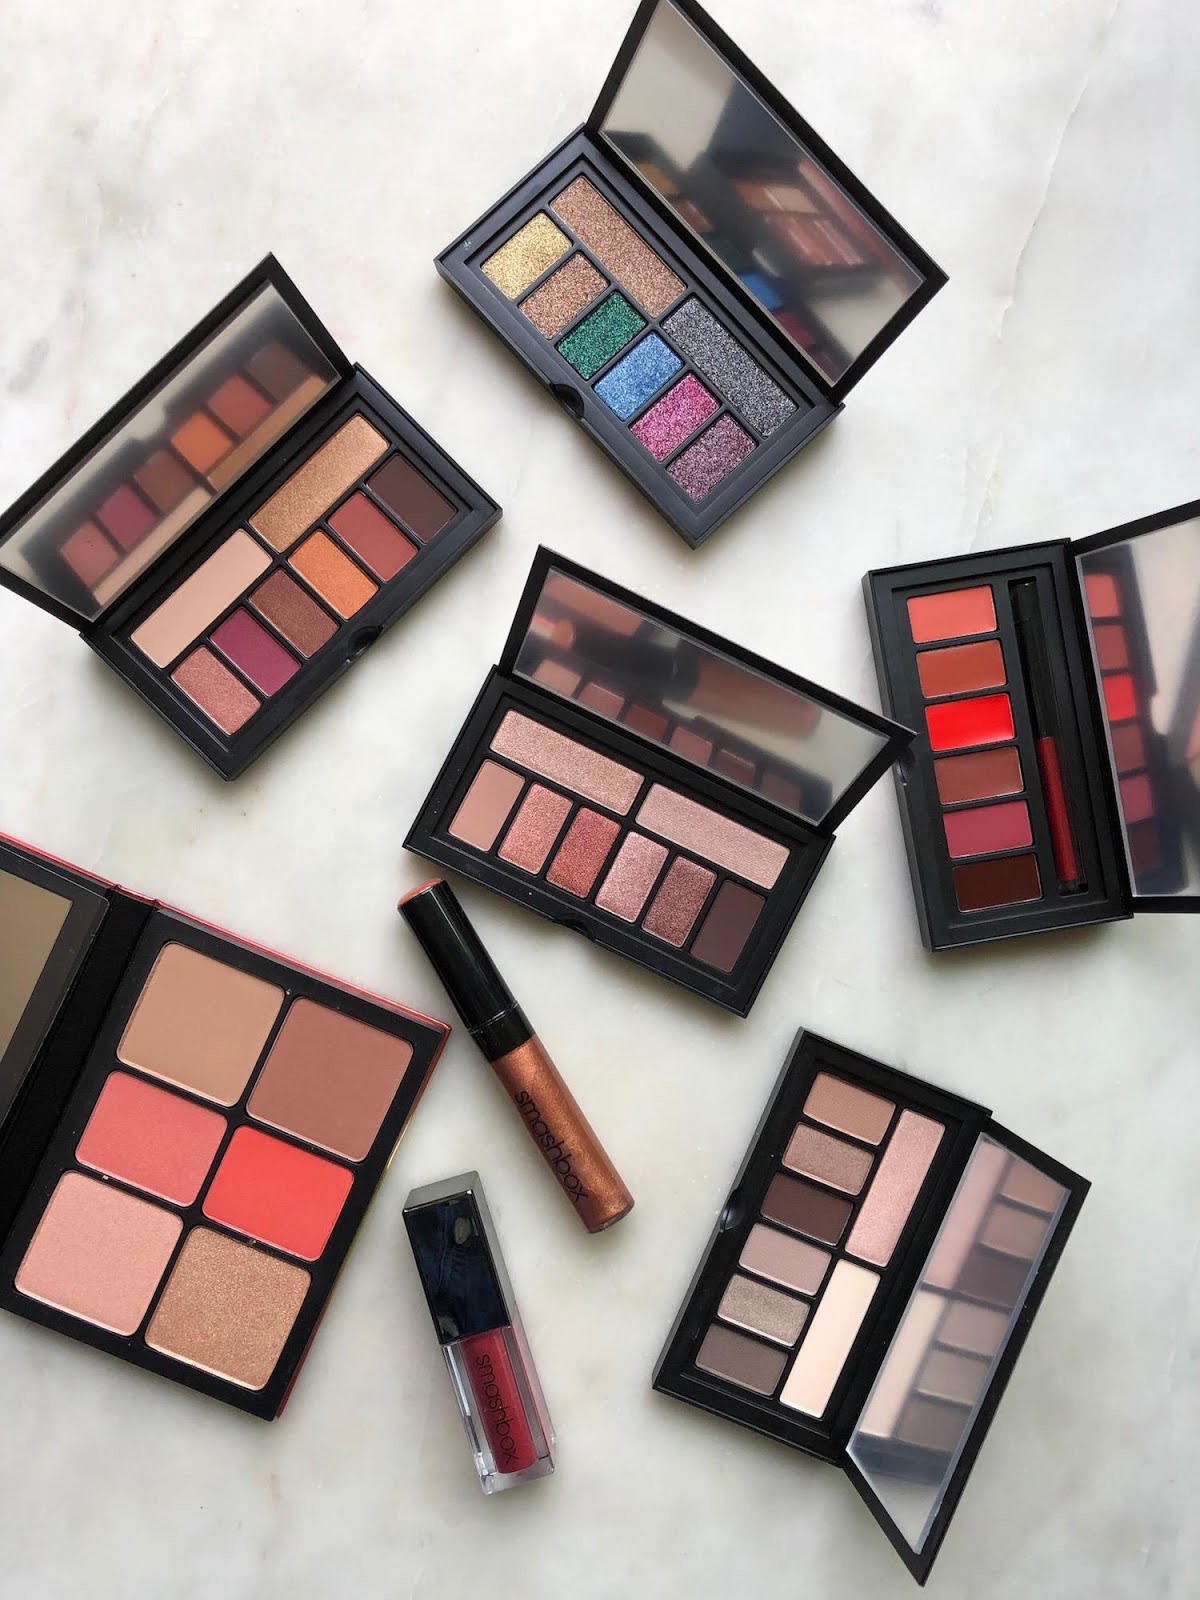 Smashbox Cover Shot Eyeshadow Palette: A quick review